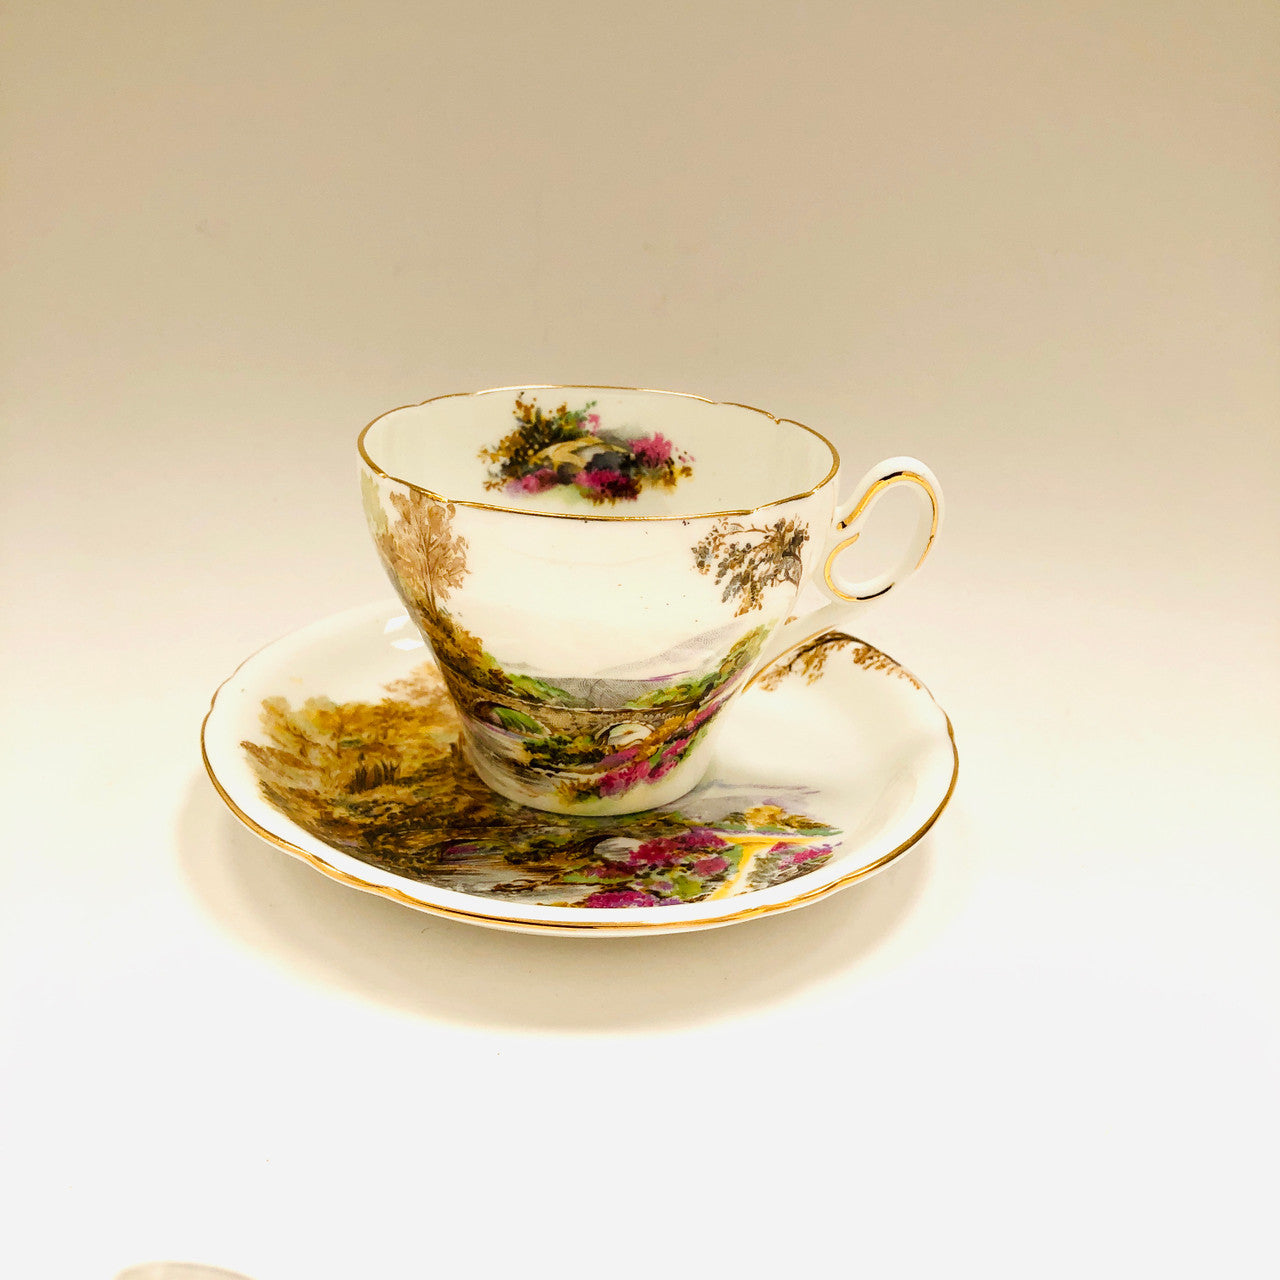 Shelley, Heather, Tea Cup, Teacup, Cup and Saucer, Saucer, Vintage, 1930's, 1940's